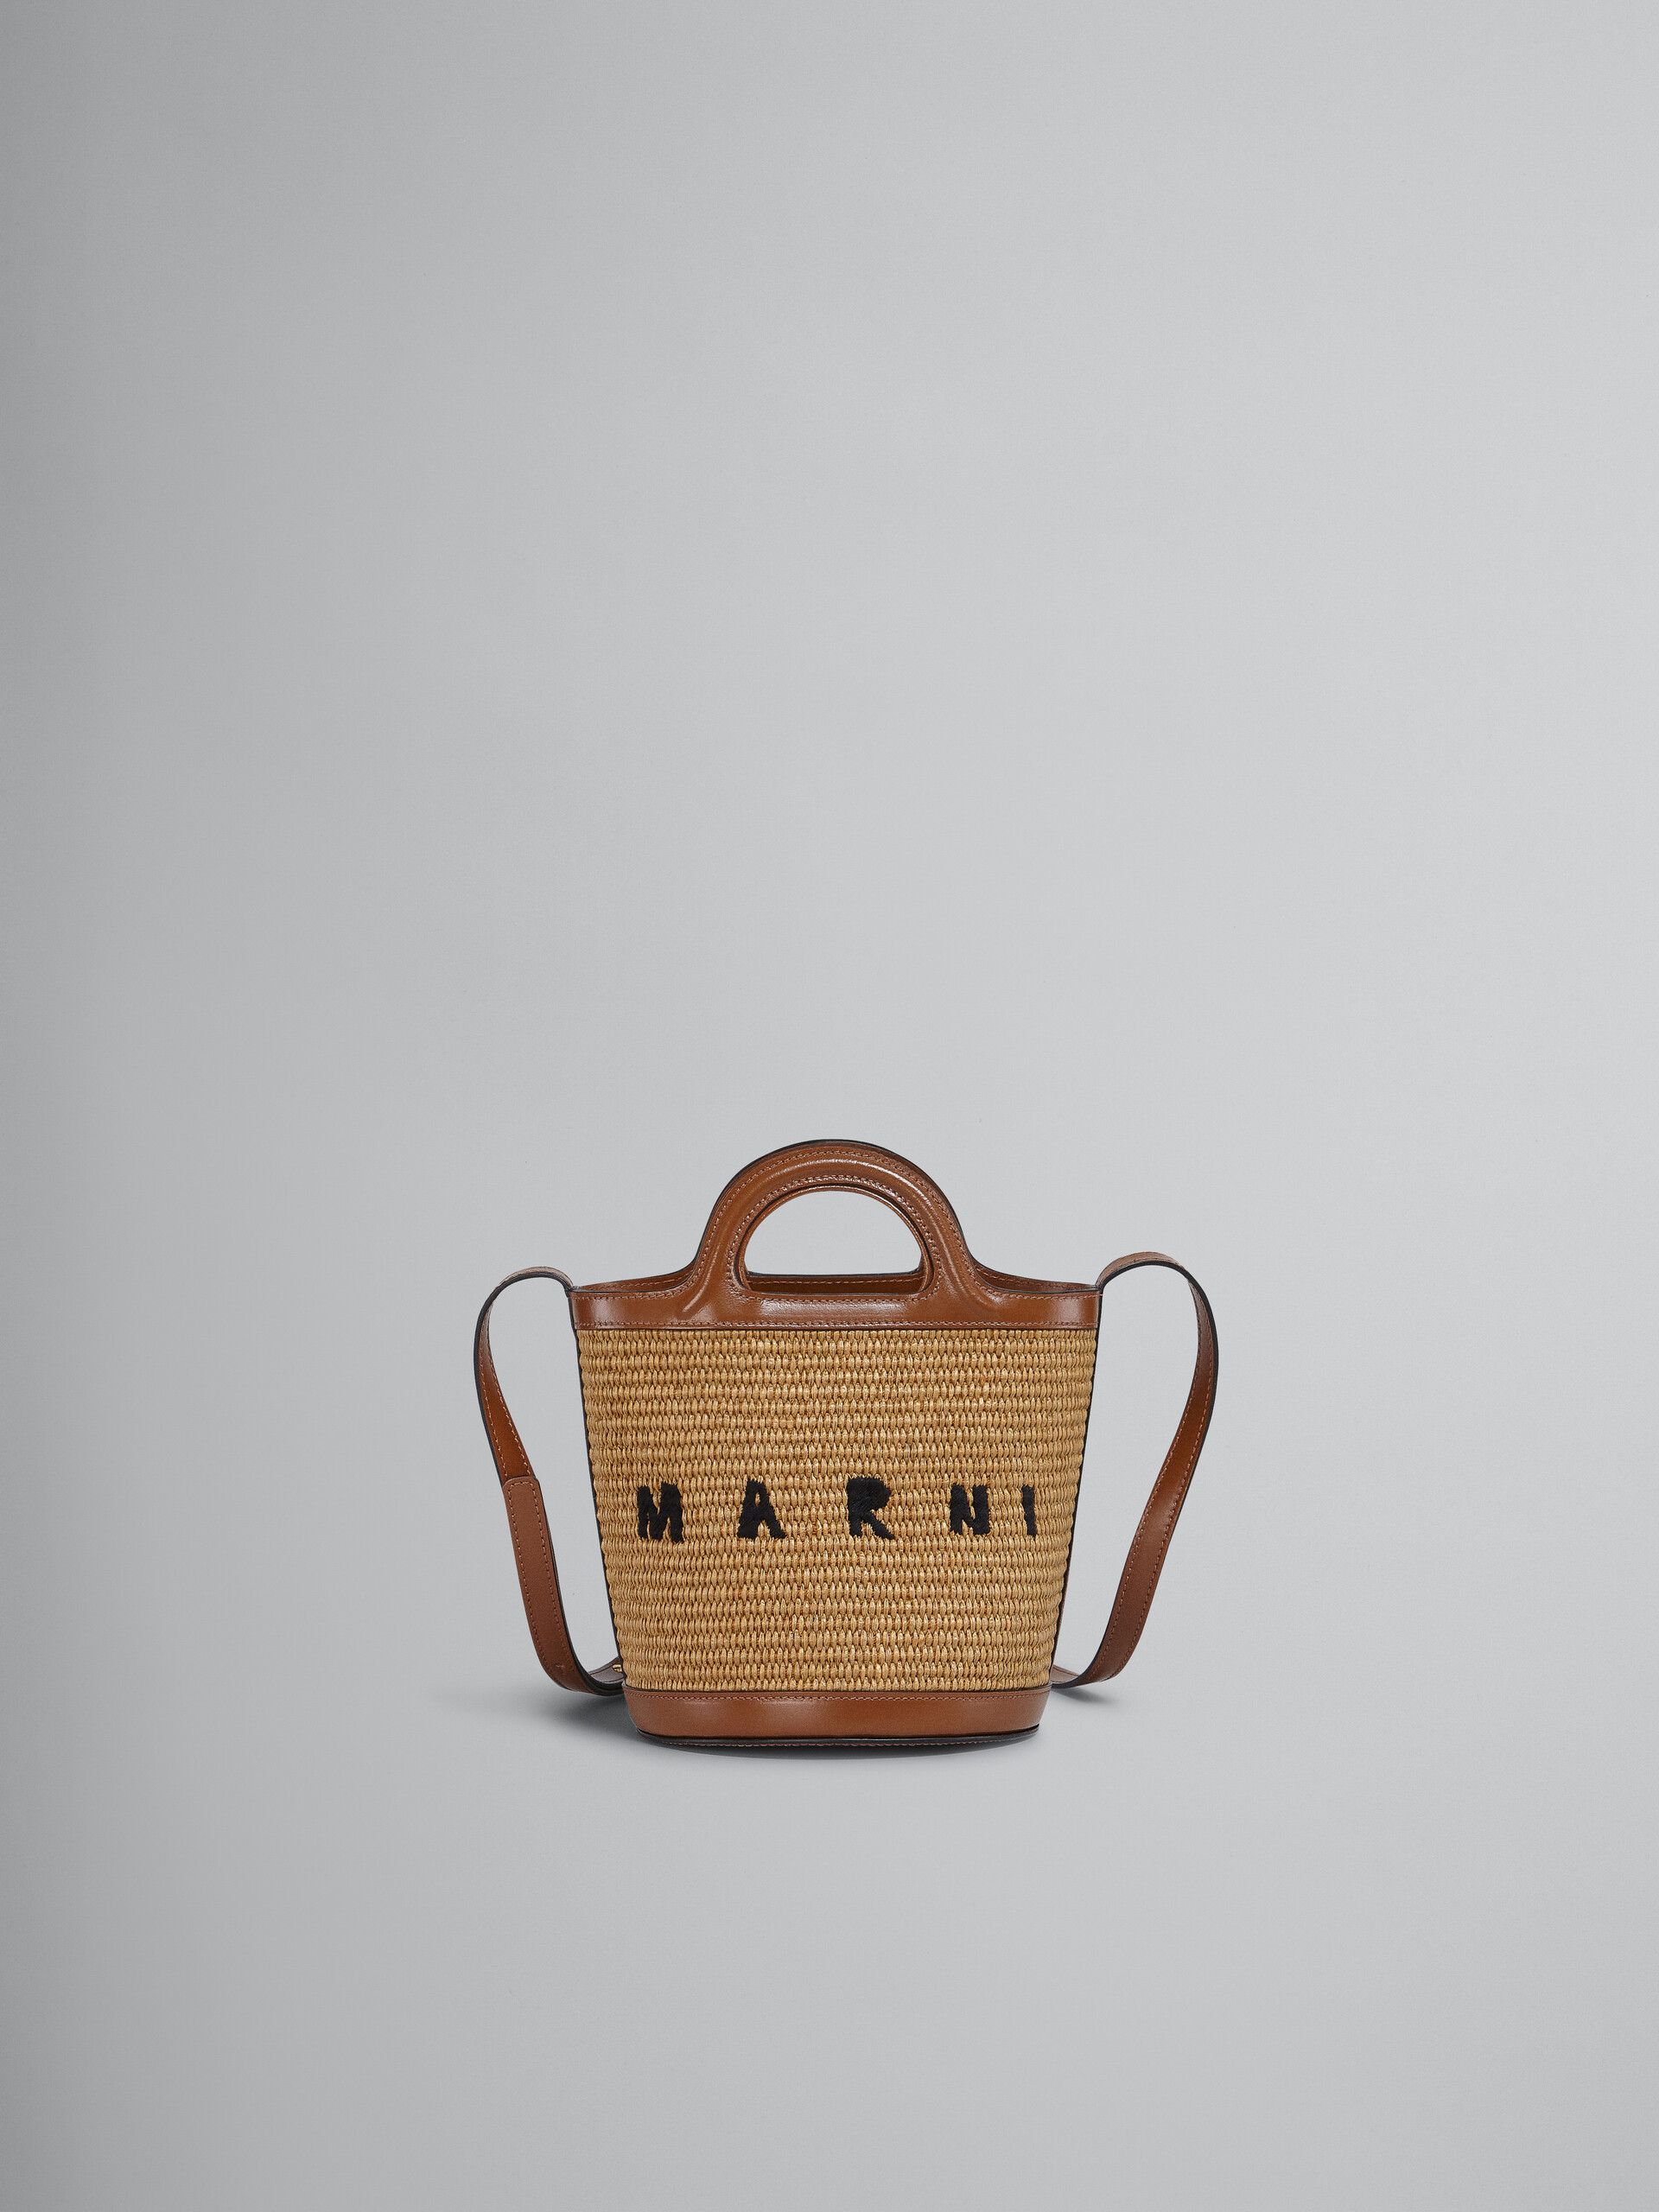 Tropicalia Small Bucket Bag in brown leather and raffia - Shoulder Bags - Image 1